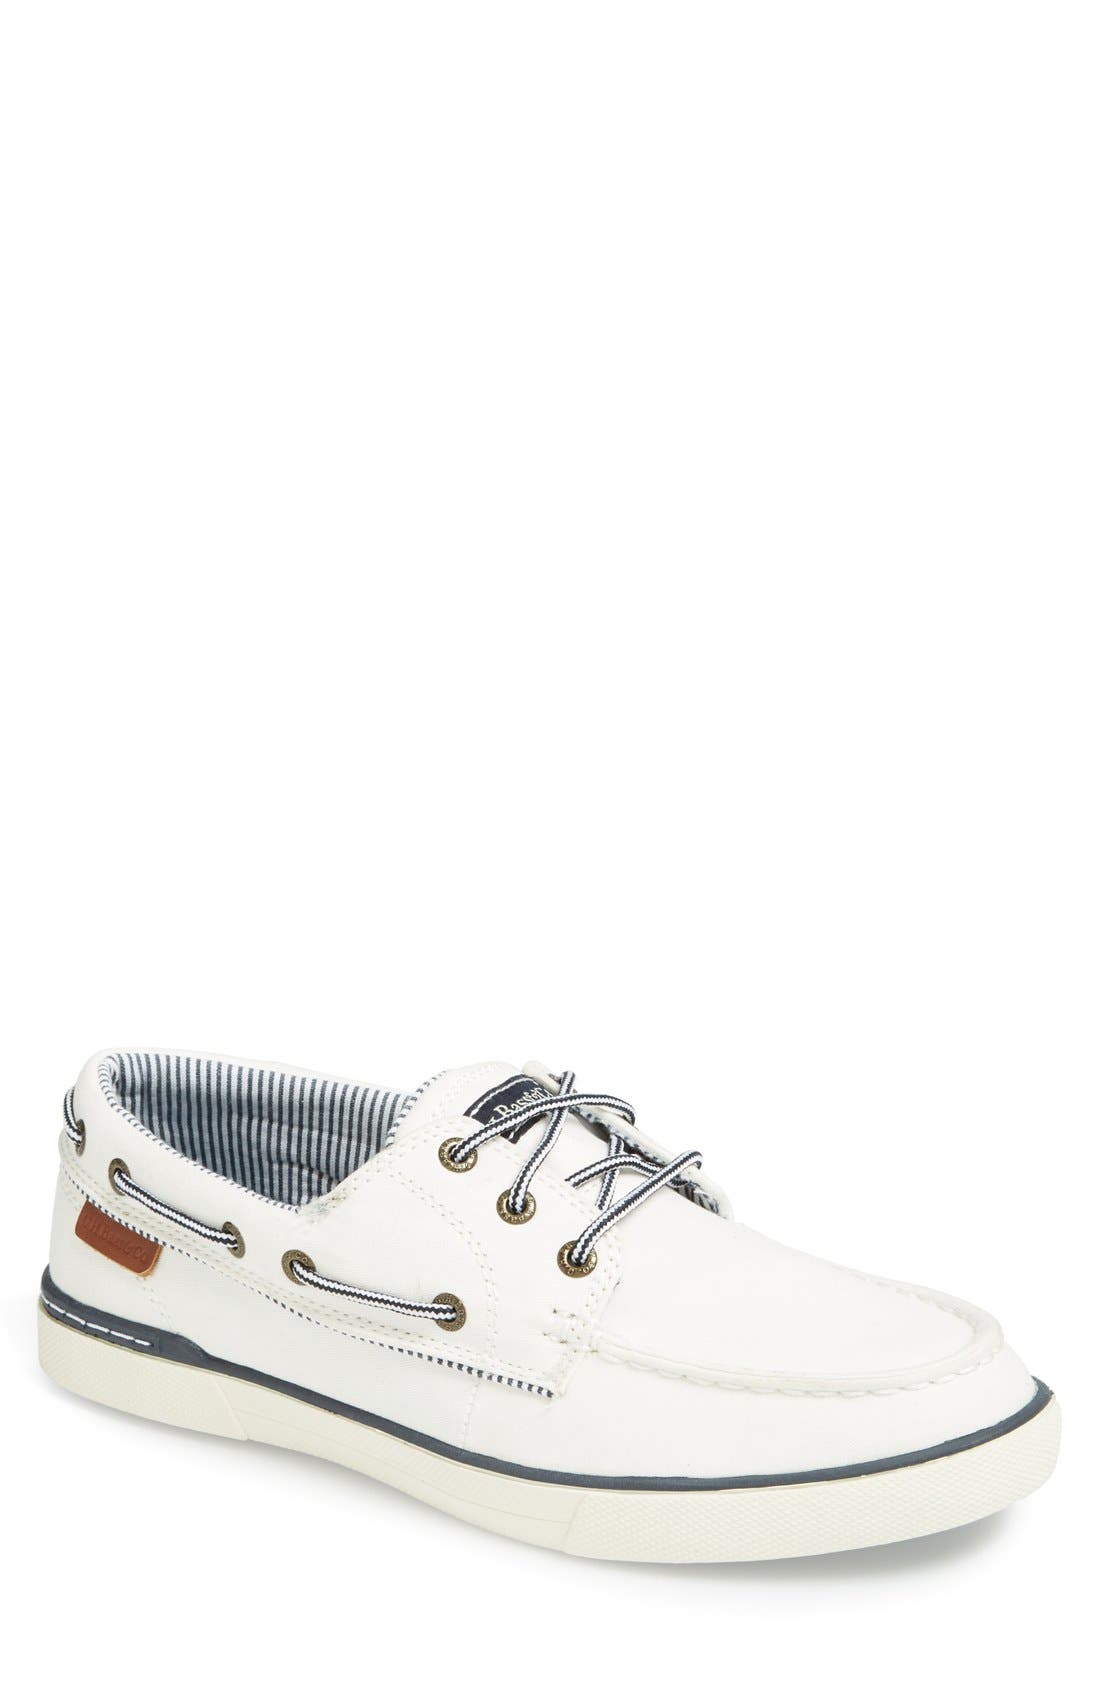 gh bass boat shoes